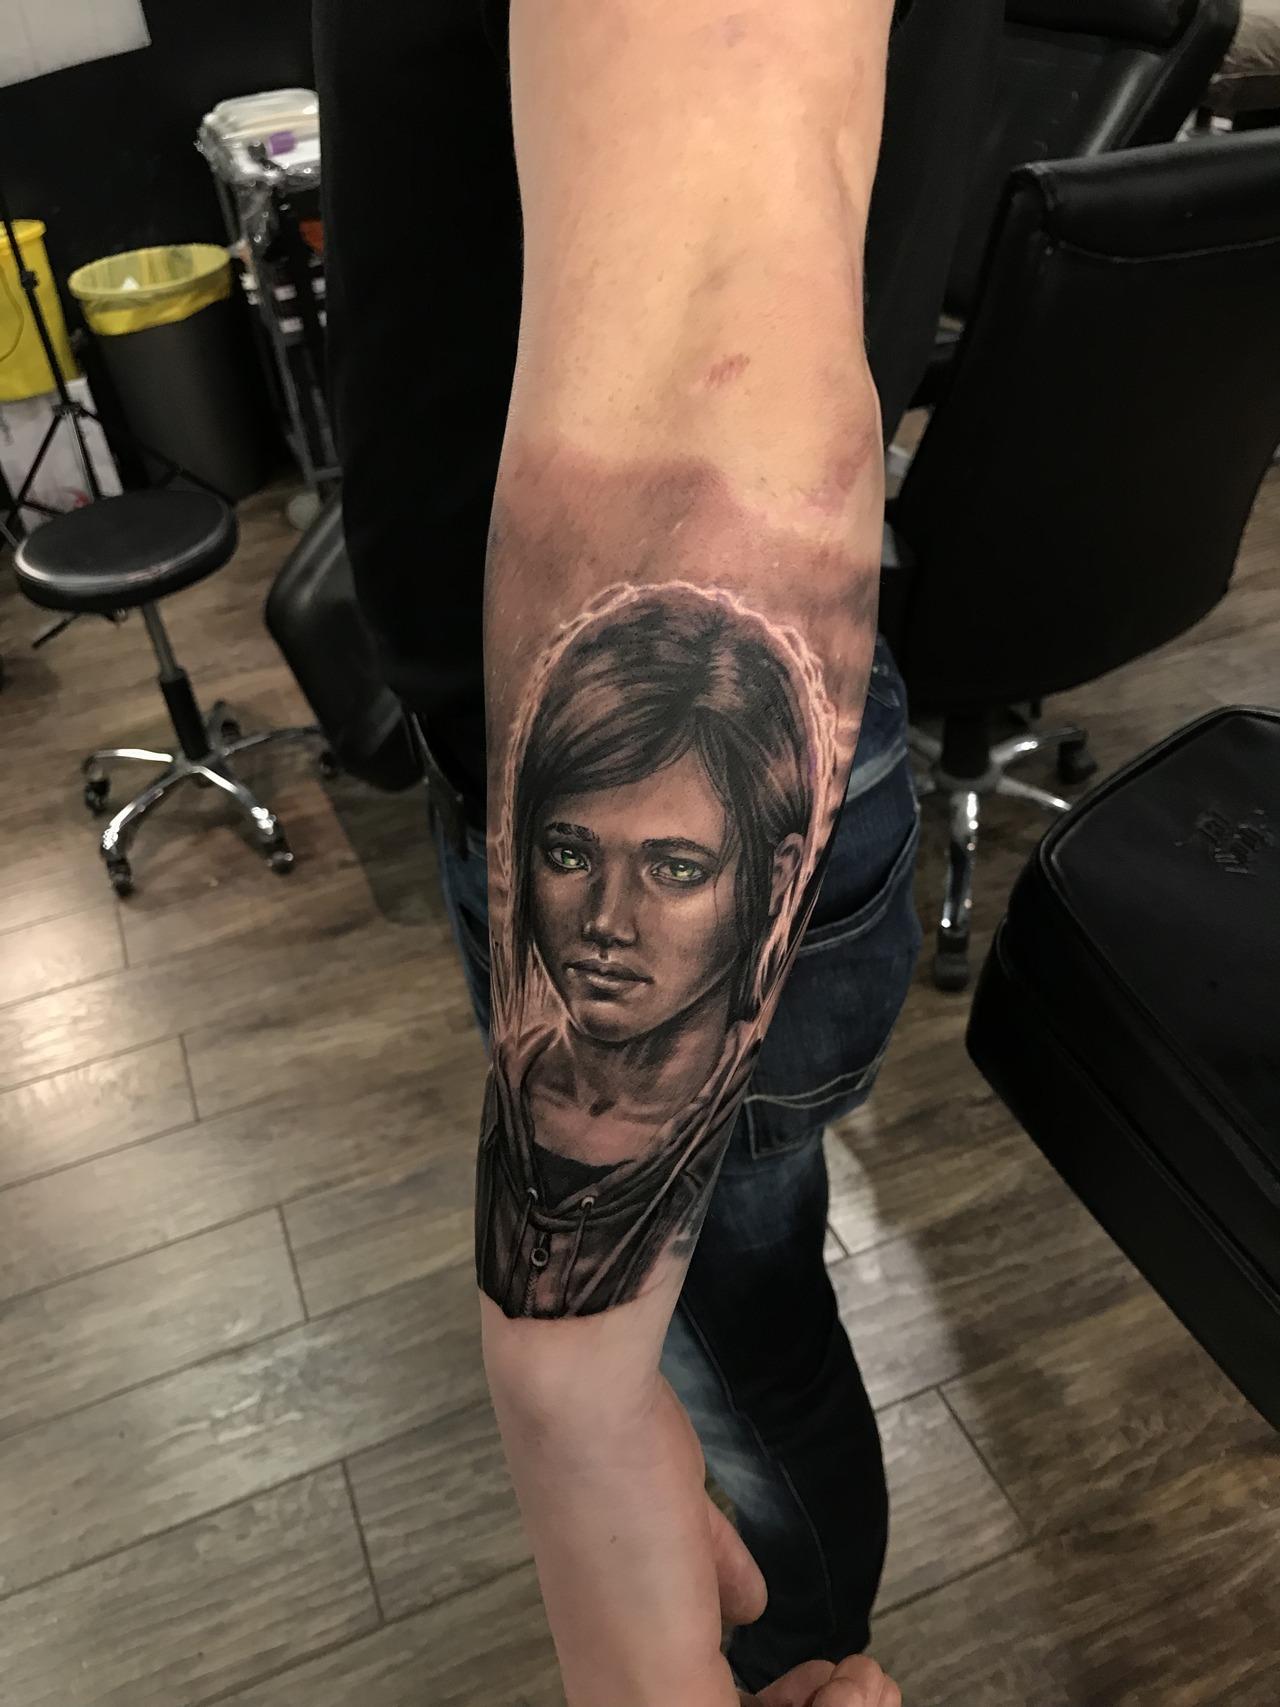 Naughty Dog on X: Chris took Ellie's tattoo in The Last of Us Part II and  made it their own. Thanks for sharing it with us! Want to submit your own  fan